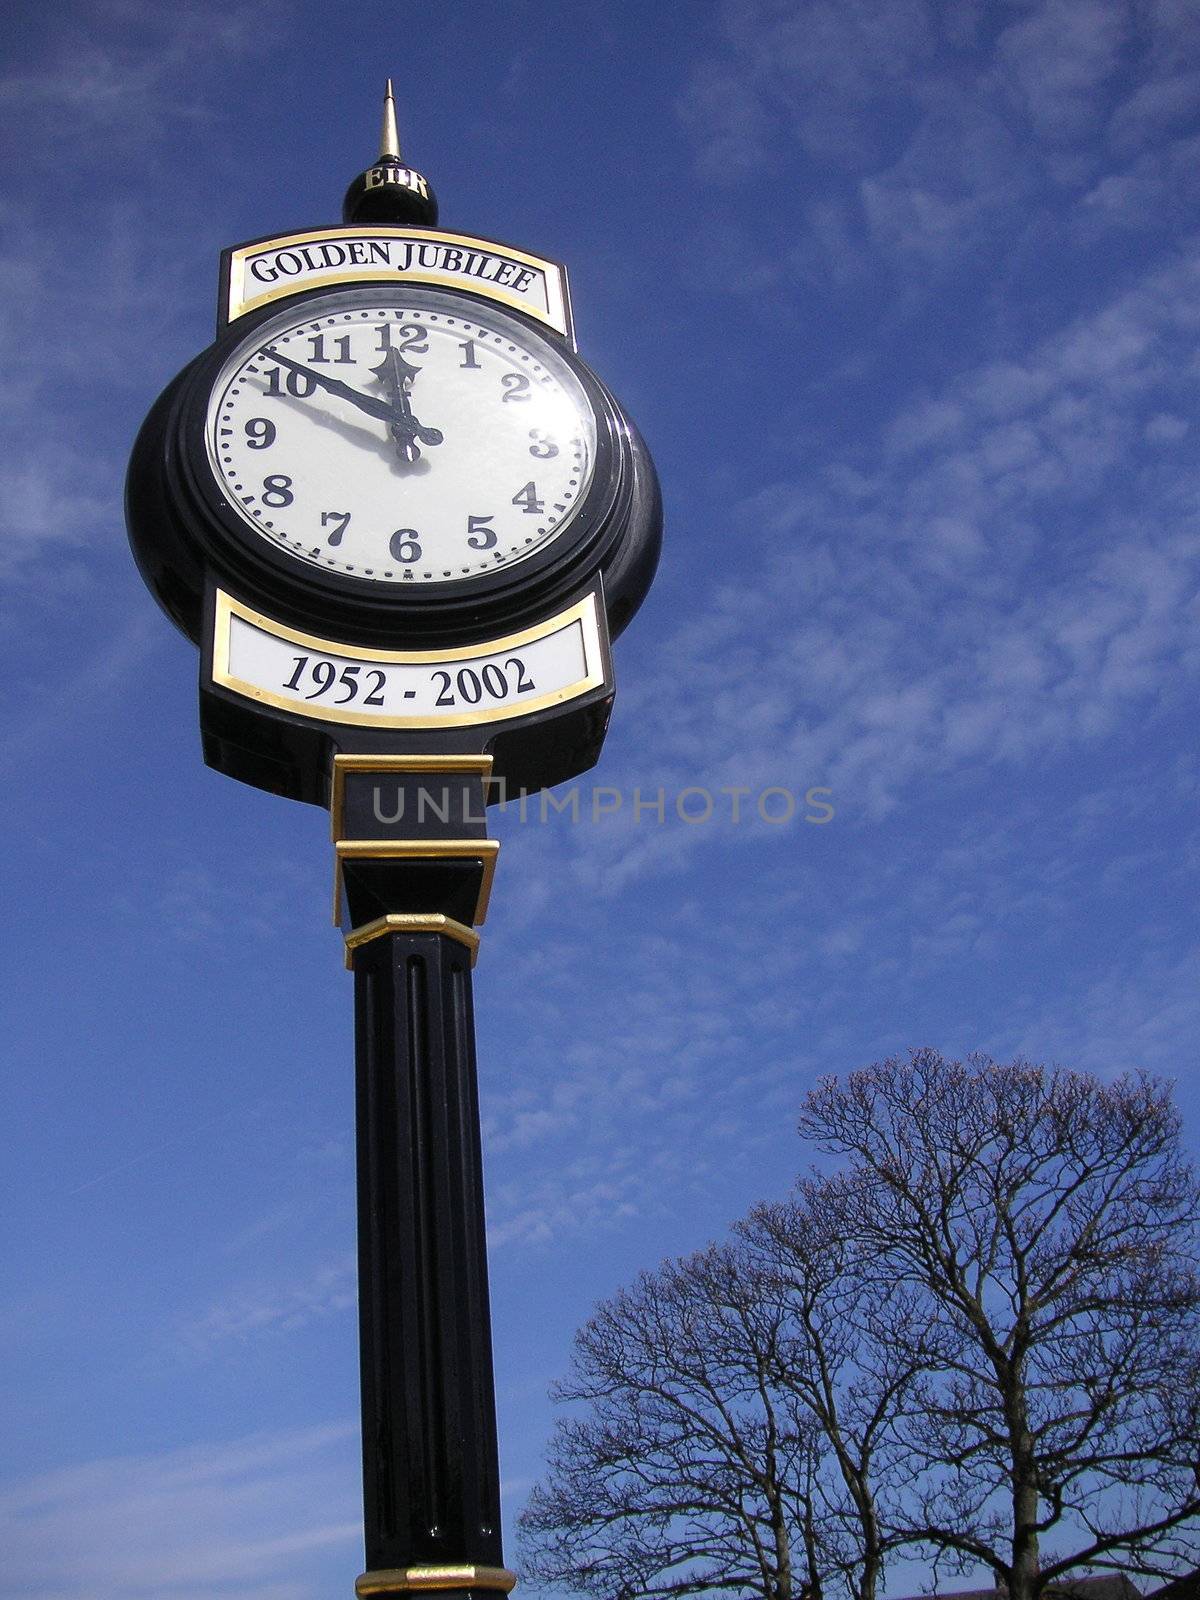 old fashioned style clock against a blue sky